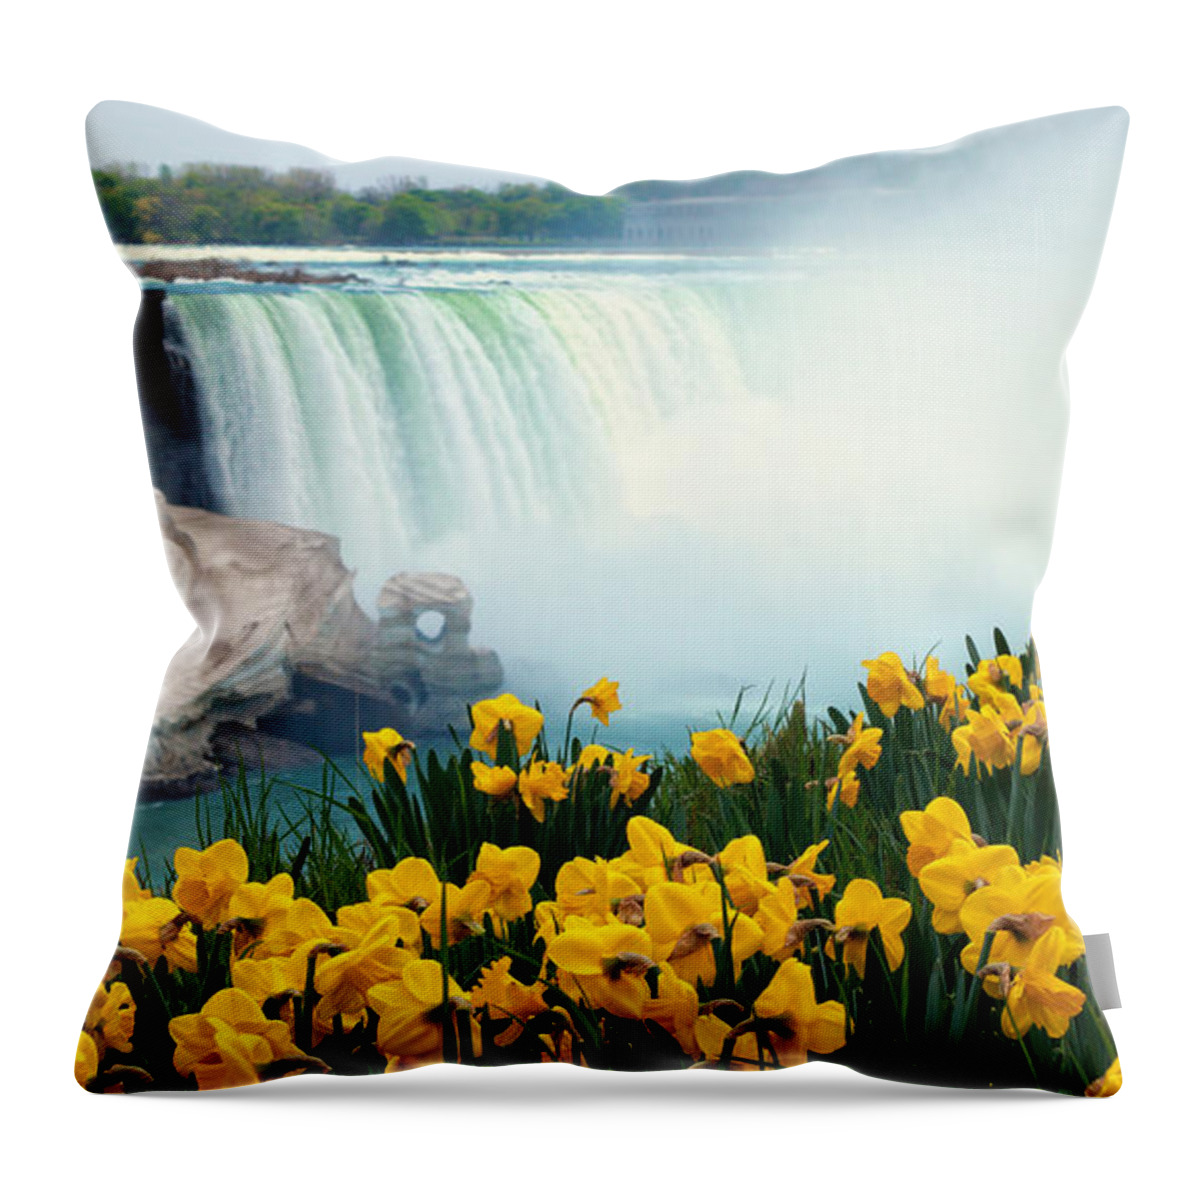 Niagara Falls Throw Pillow featuring the photograph Niagara Falls Spring Flowers and Melting Ice by Charline Xia